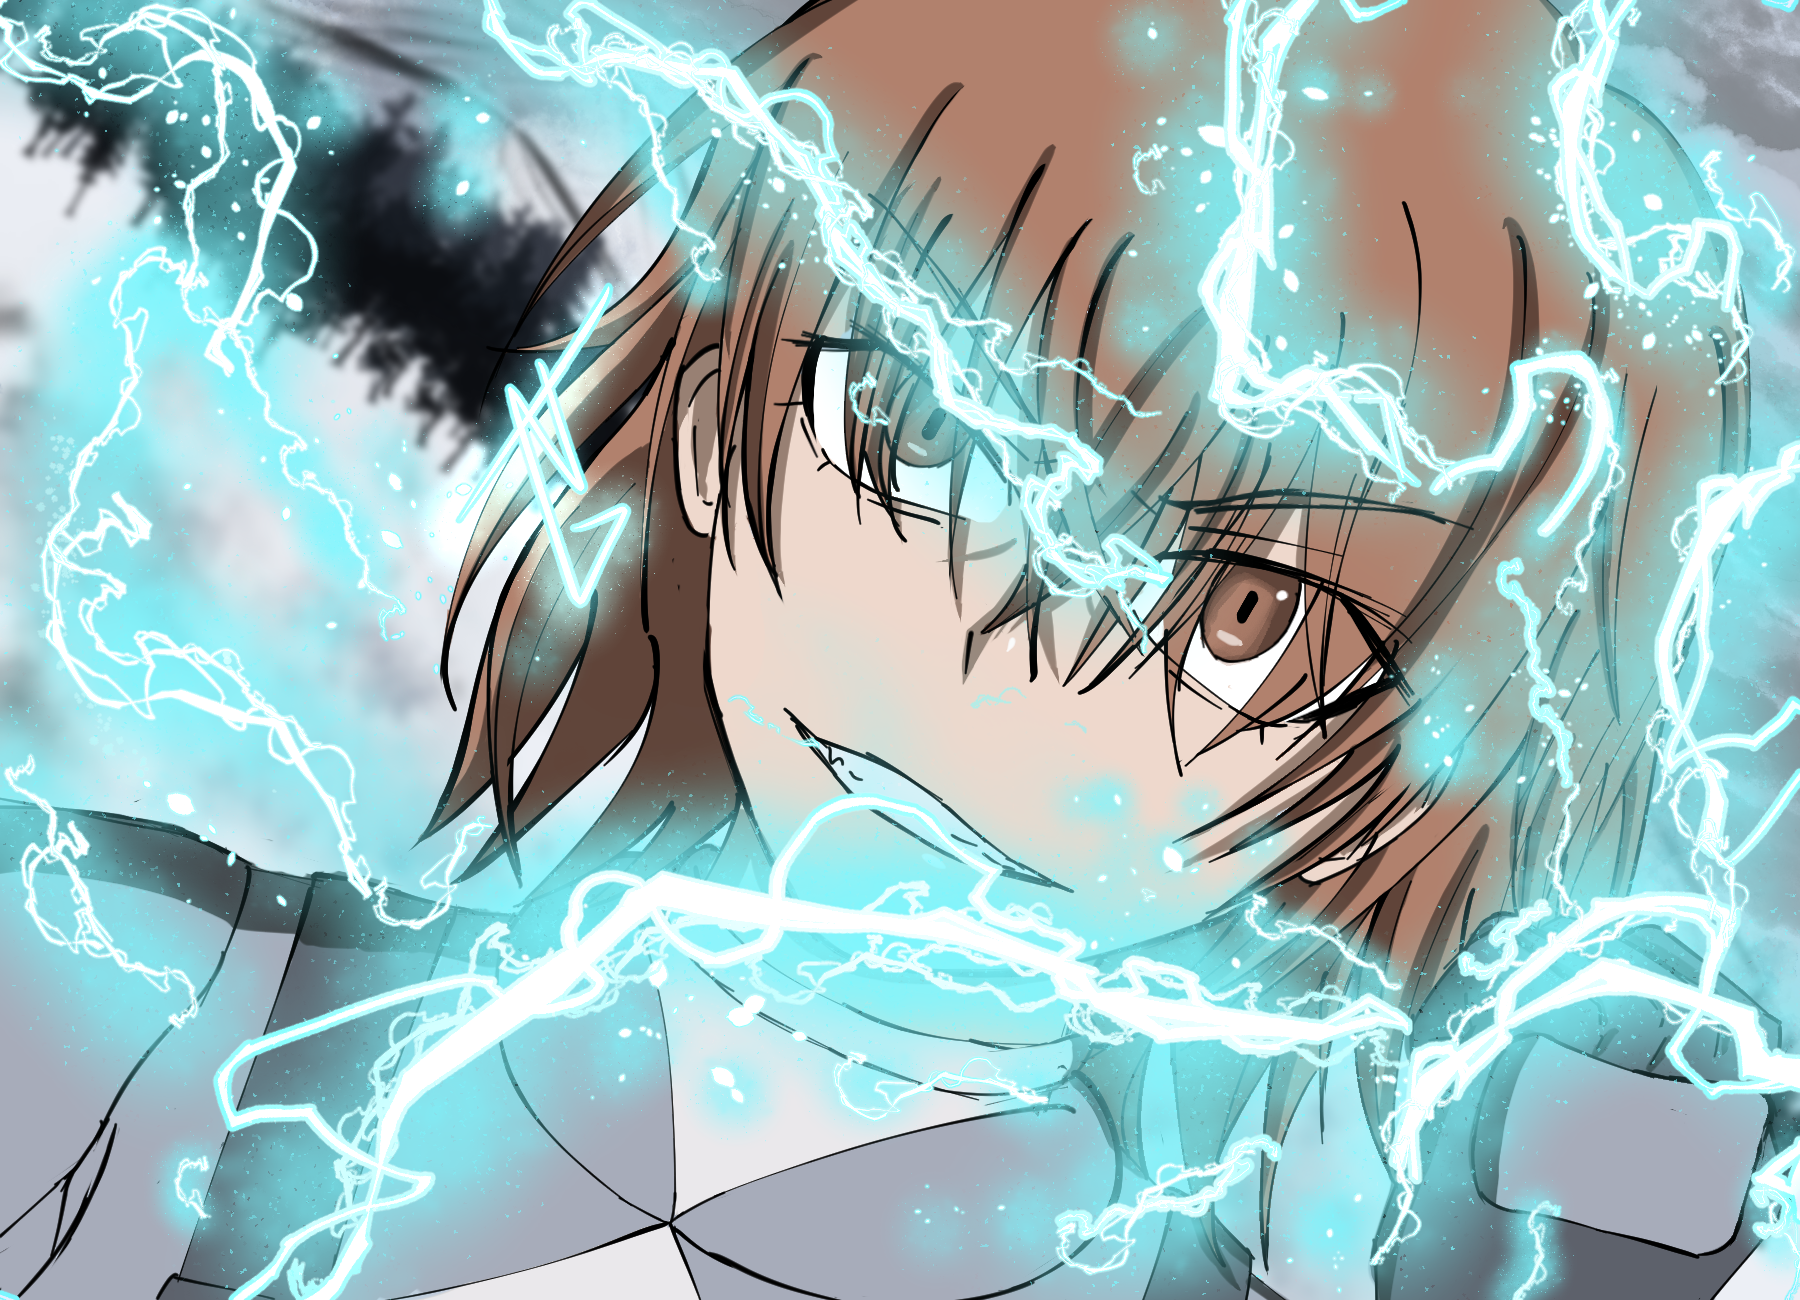 Fanart of Misaka Worst from A Certain Magical Index.